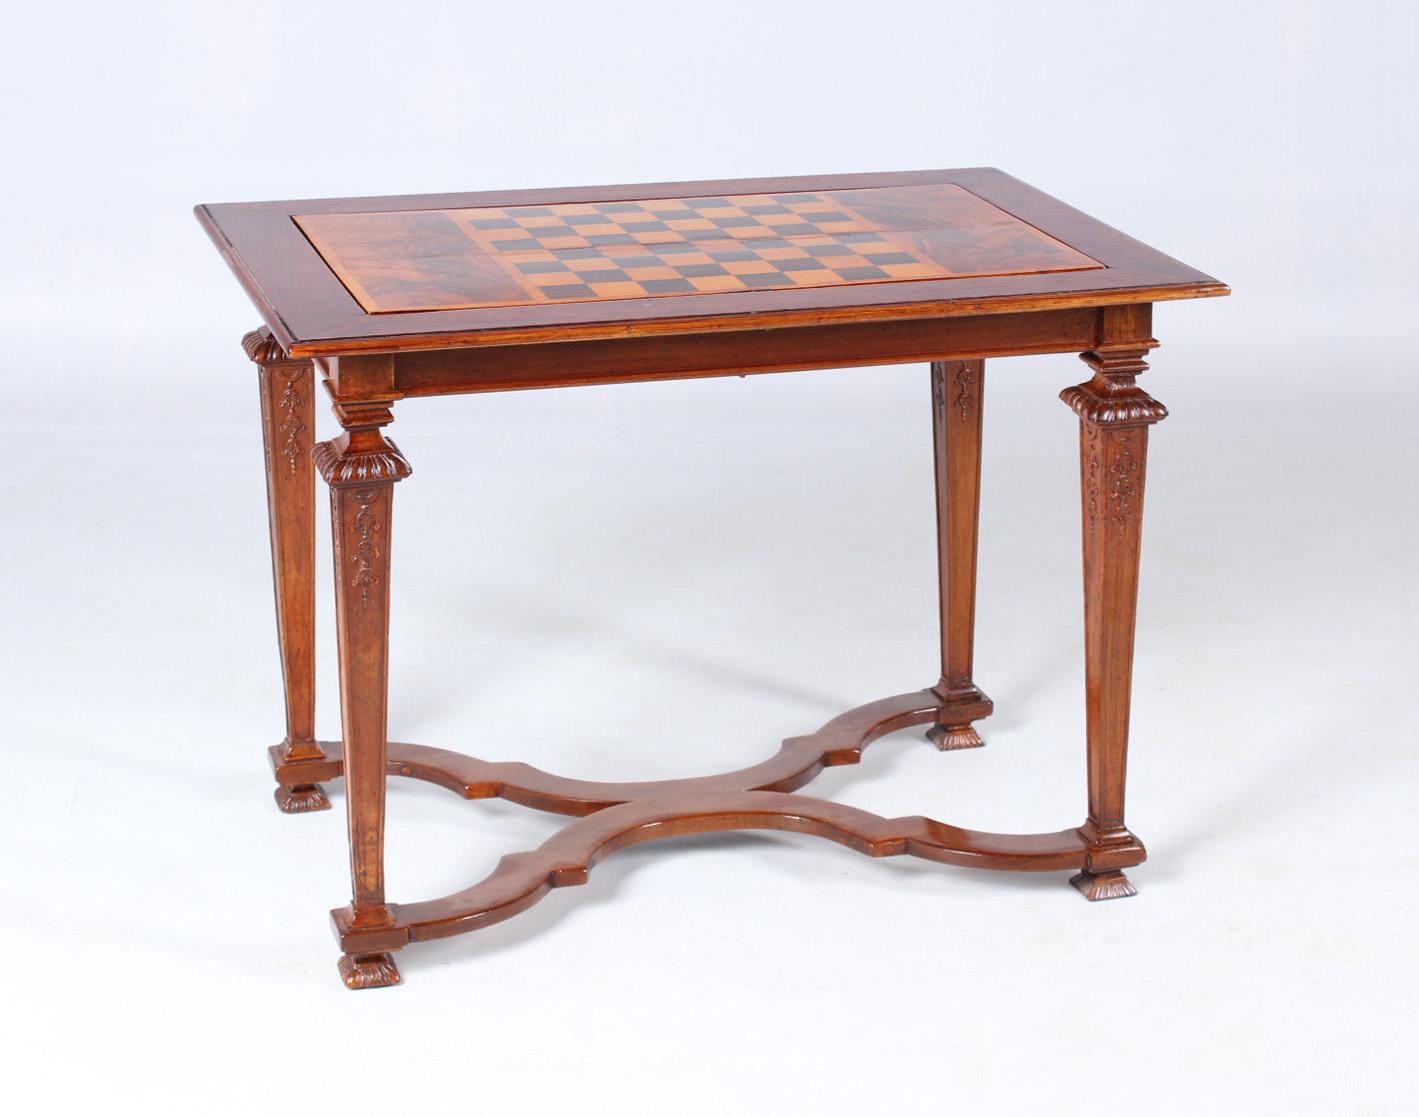 18th century chess and backgammon table

South Germany
Walnut
Louis XVI around 1780

Dimensions: H x W x D: 73 x 99 x 64 cm

Description:
Tapered downward square legs with fine carvings. Cross-shaped curved central bar with thread